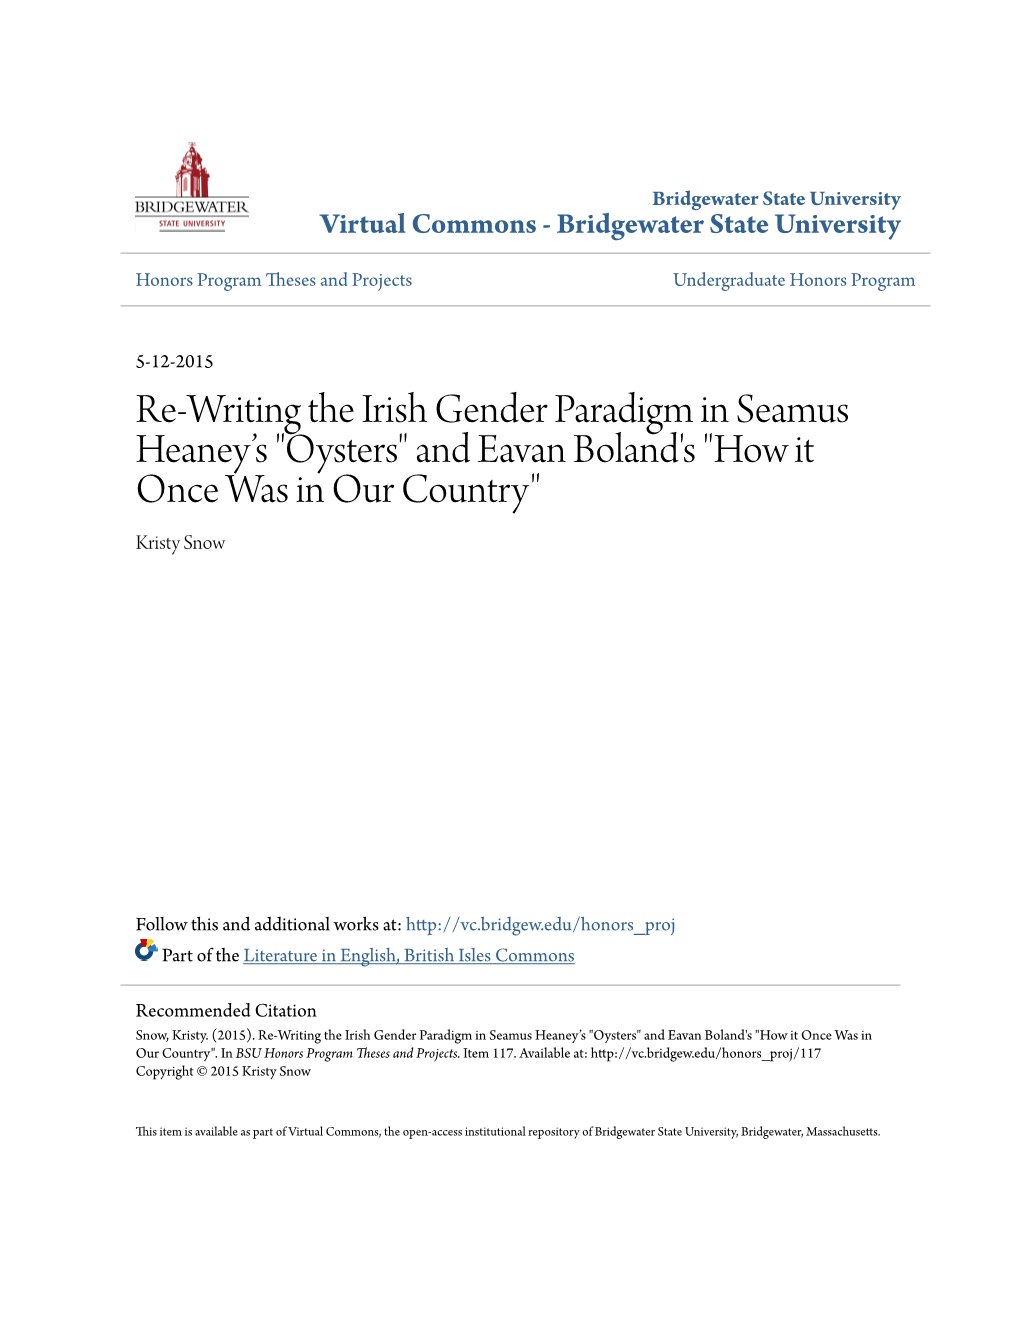 Re-Writing the Irish Gender Paradigm in Seamus Heaney's "Oysters"